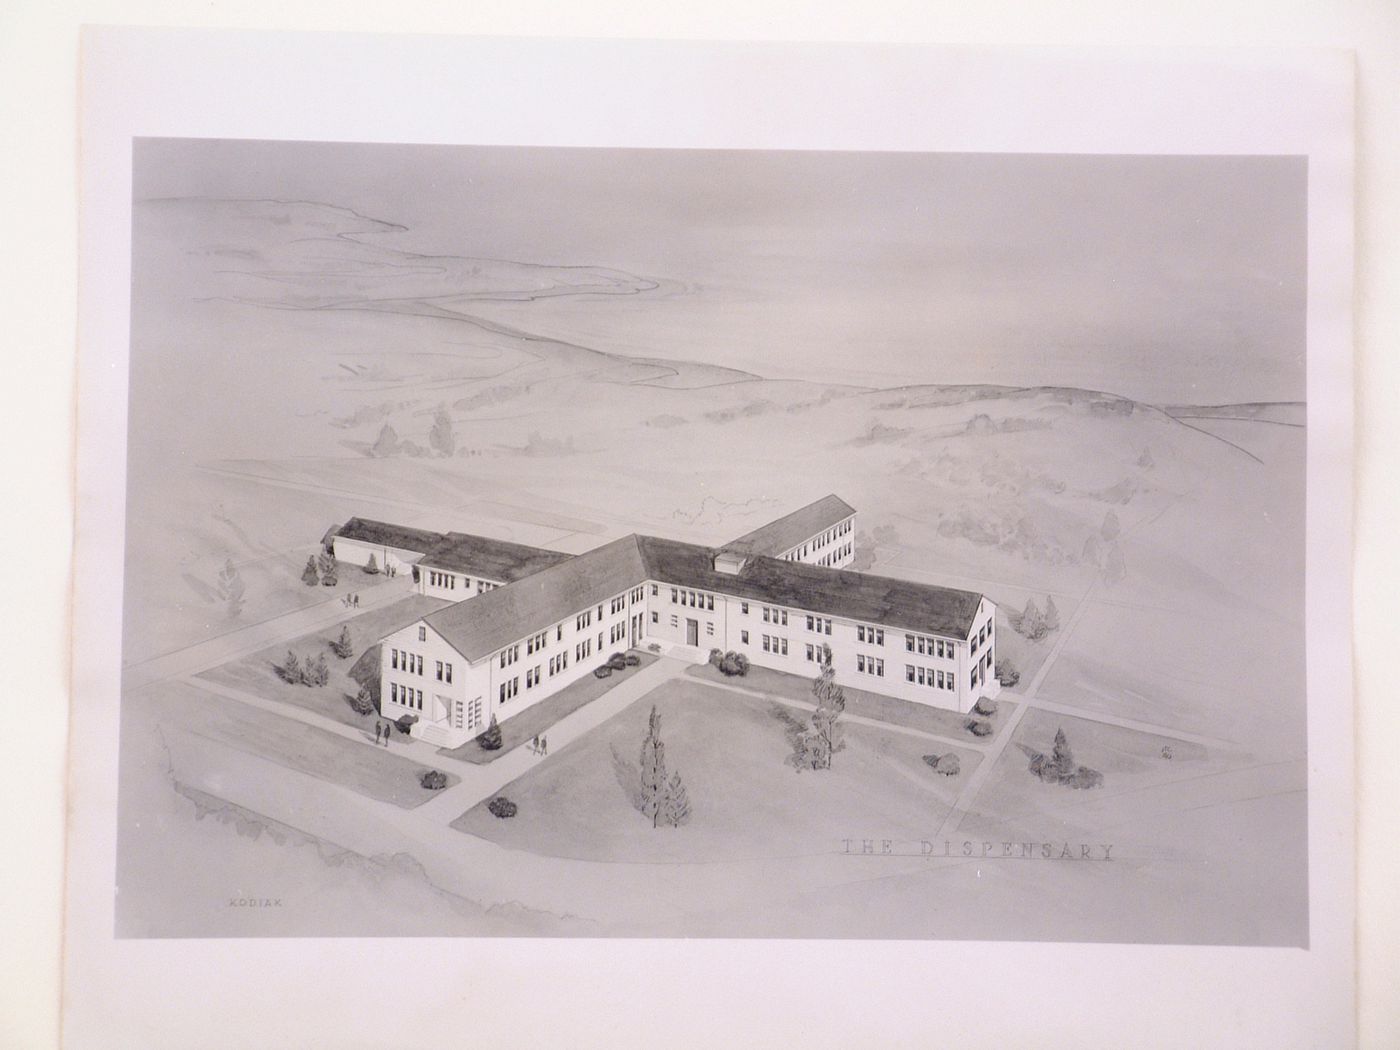 Photograph of an bird's-eye perspective drawing for or of the Dispensary, United States Naval Air Base, Kodiak, Alaska